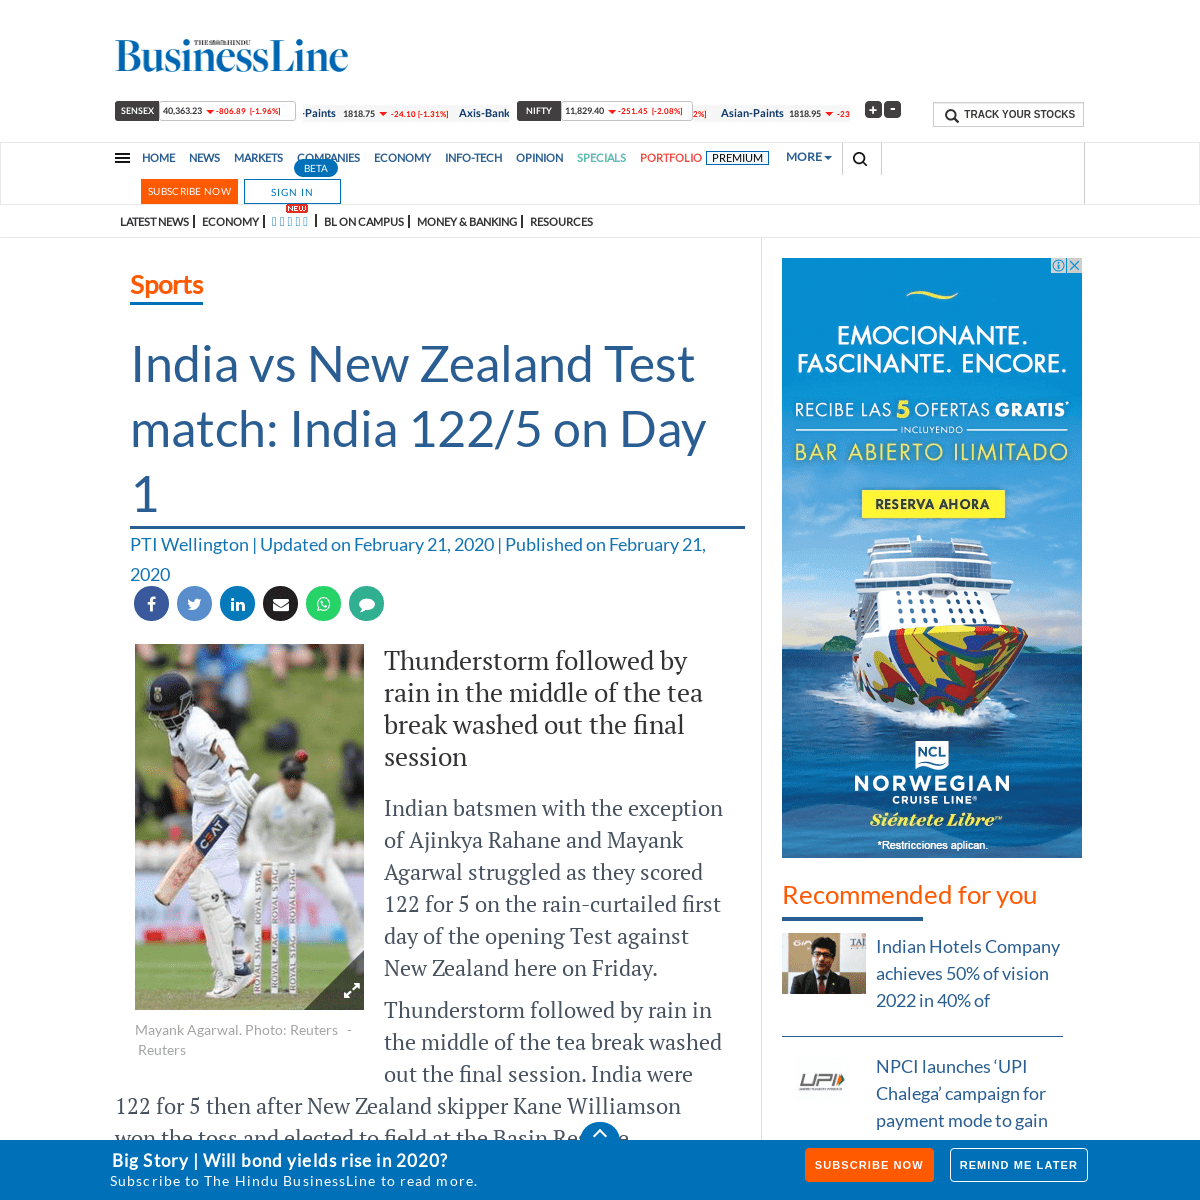 A complete backup of www.thehindubusinessline.com/news/sports/india-vs-new-zealand-test-match-india-1225-on-day-1/article3087801